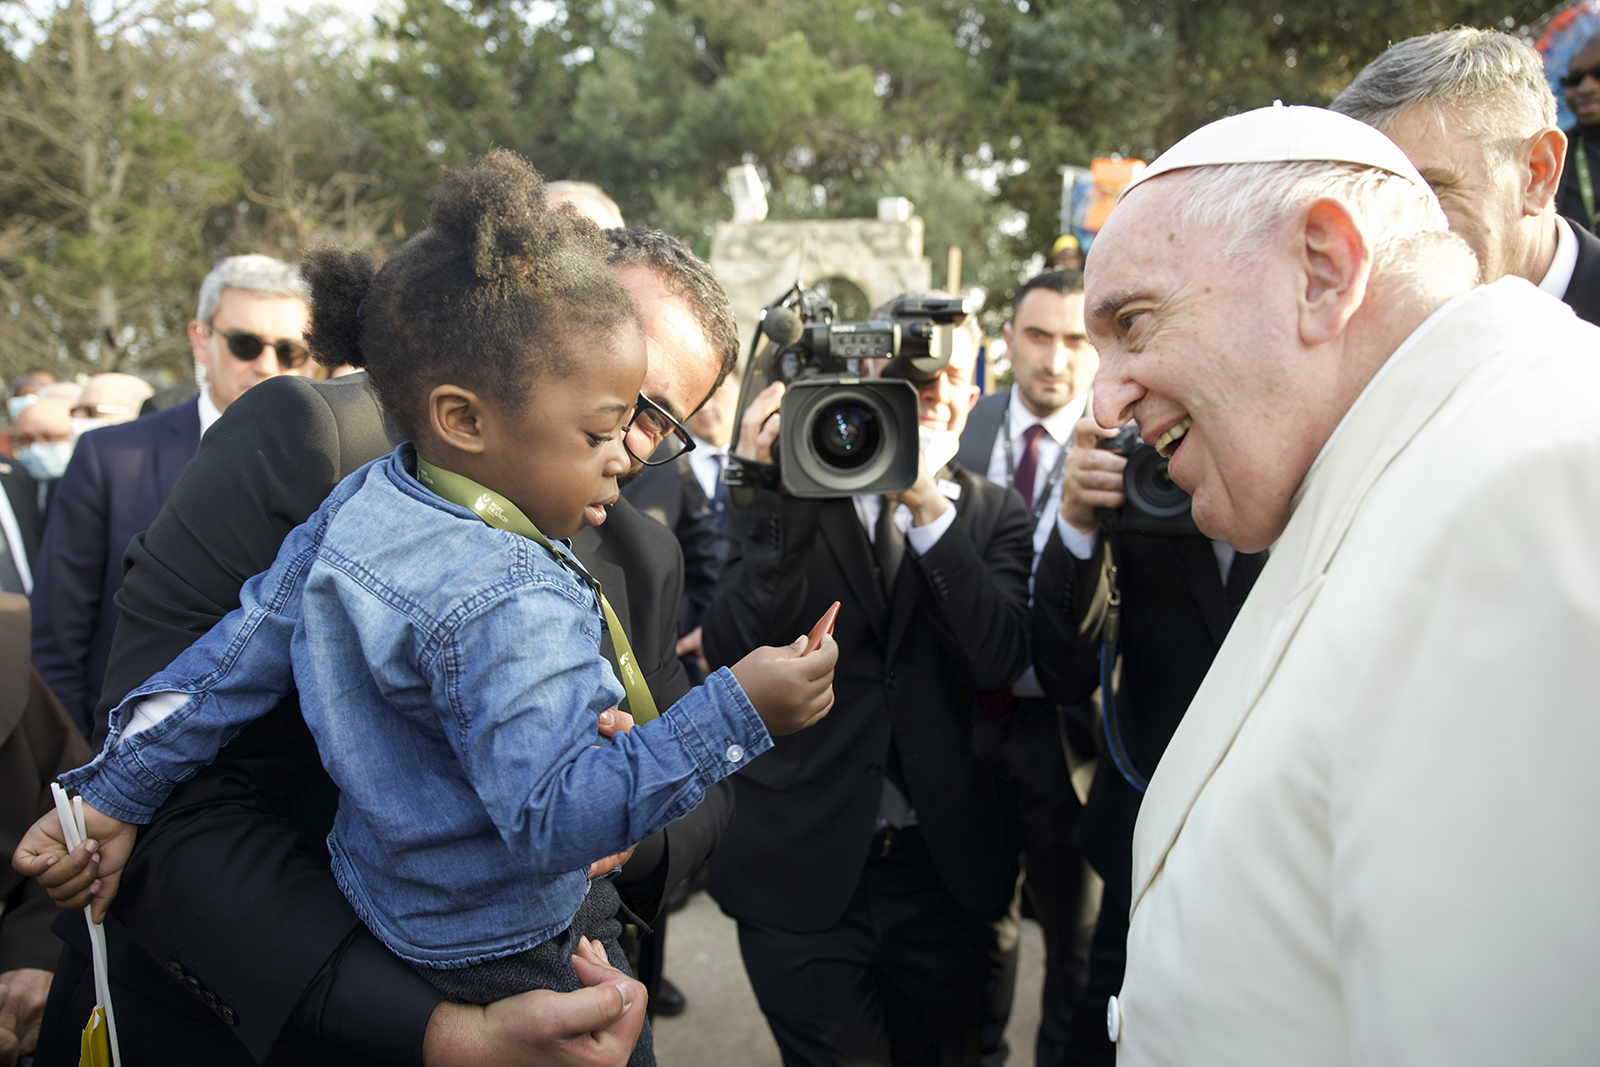 Pope Francis speaks to a young girl as he leaves the 'John XXIII Peace Lab' center for migrants in Hal Far, Malta, Sunday, April 3, 2022. Pope Francis prayed for the world to show more kindness and compassion to refugees as he paid tribute Sunday in Malta to the shipwrecked St. Paul and meets with migrants who, like the apostle, arrived on the Mediterranean island and were welcomed. (AP Photo/Rene Rossignaud)